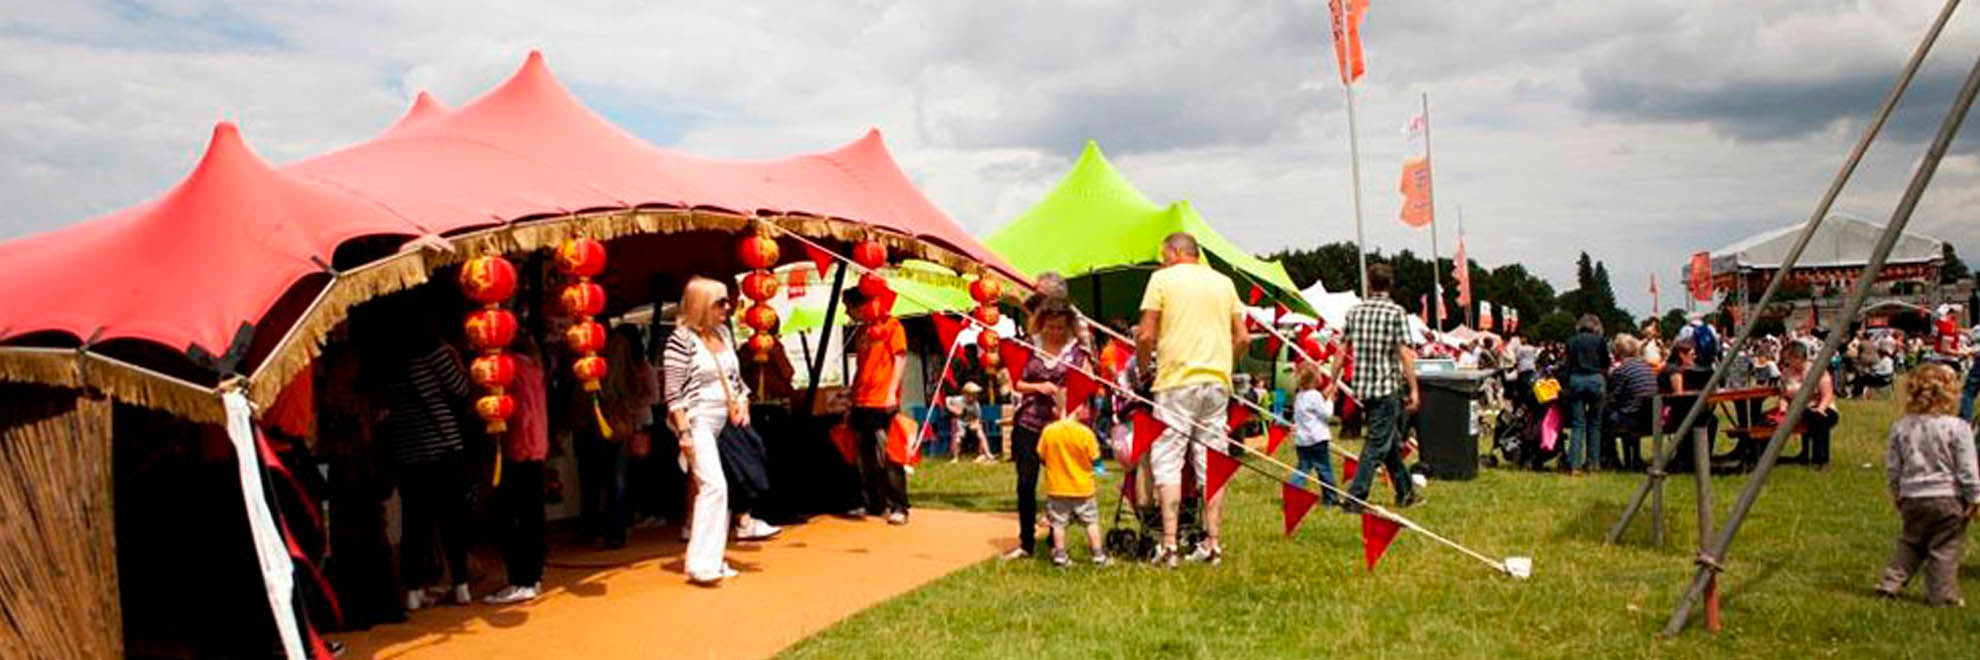 Red Stretch Tent with red bunting